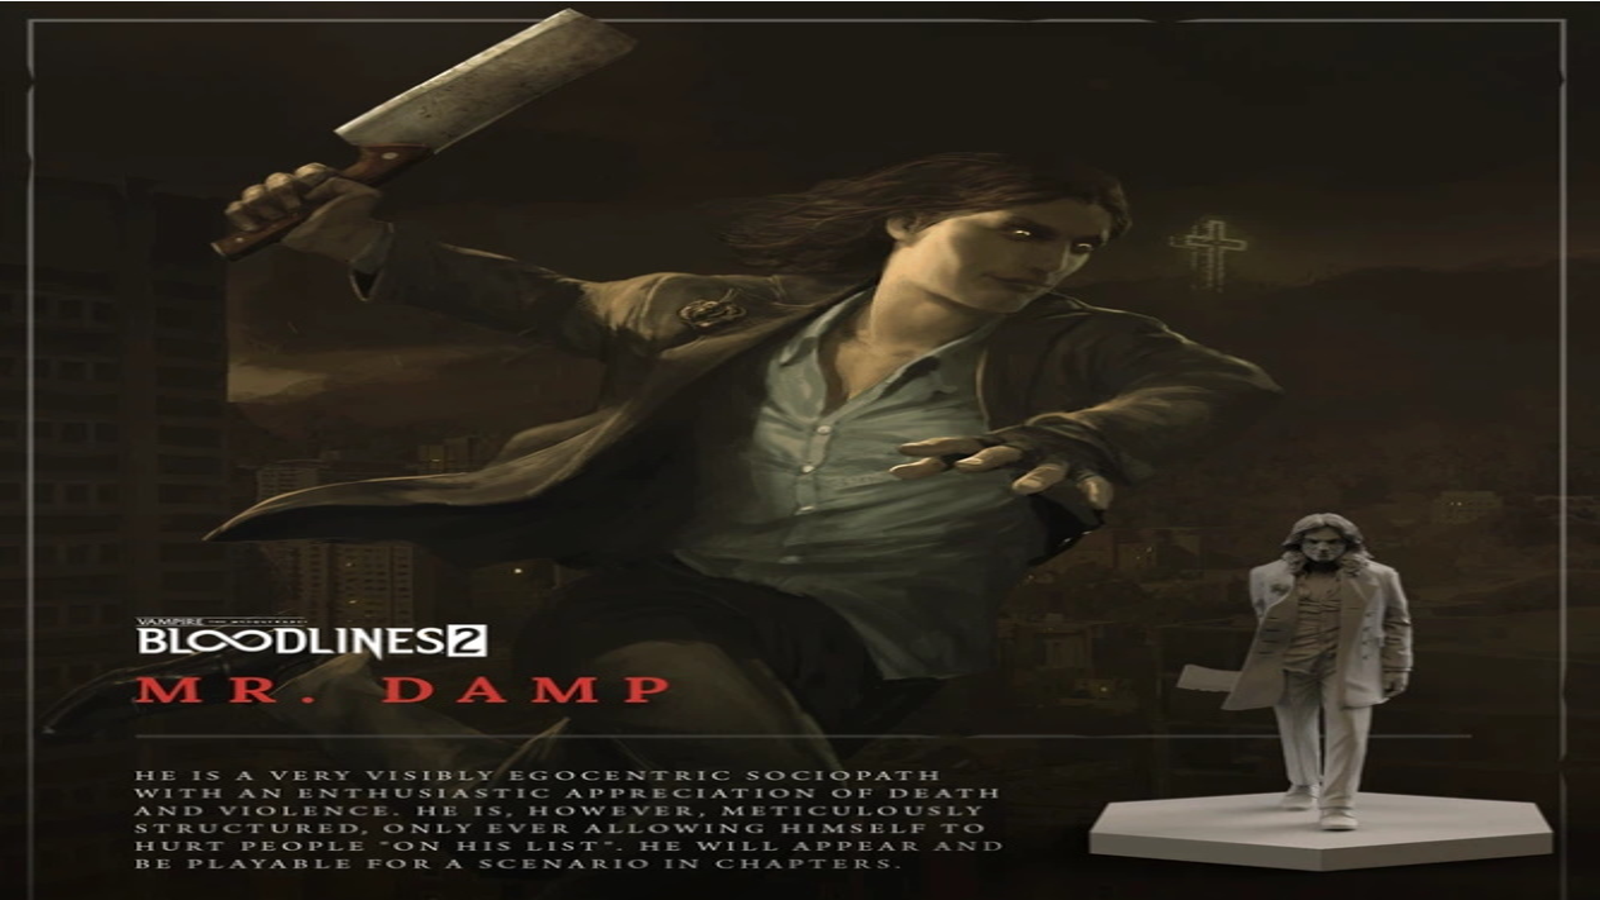 Vampire: The Masquerade - Bloodlines 2 description and review of the RPG  2020 game